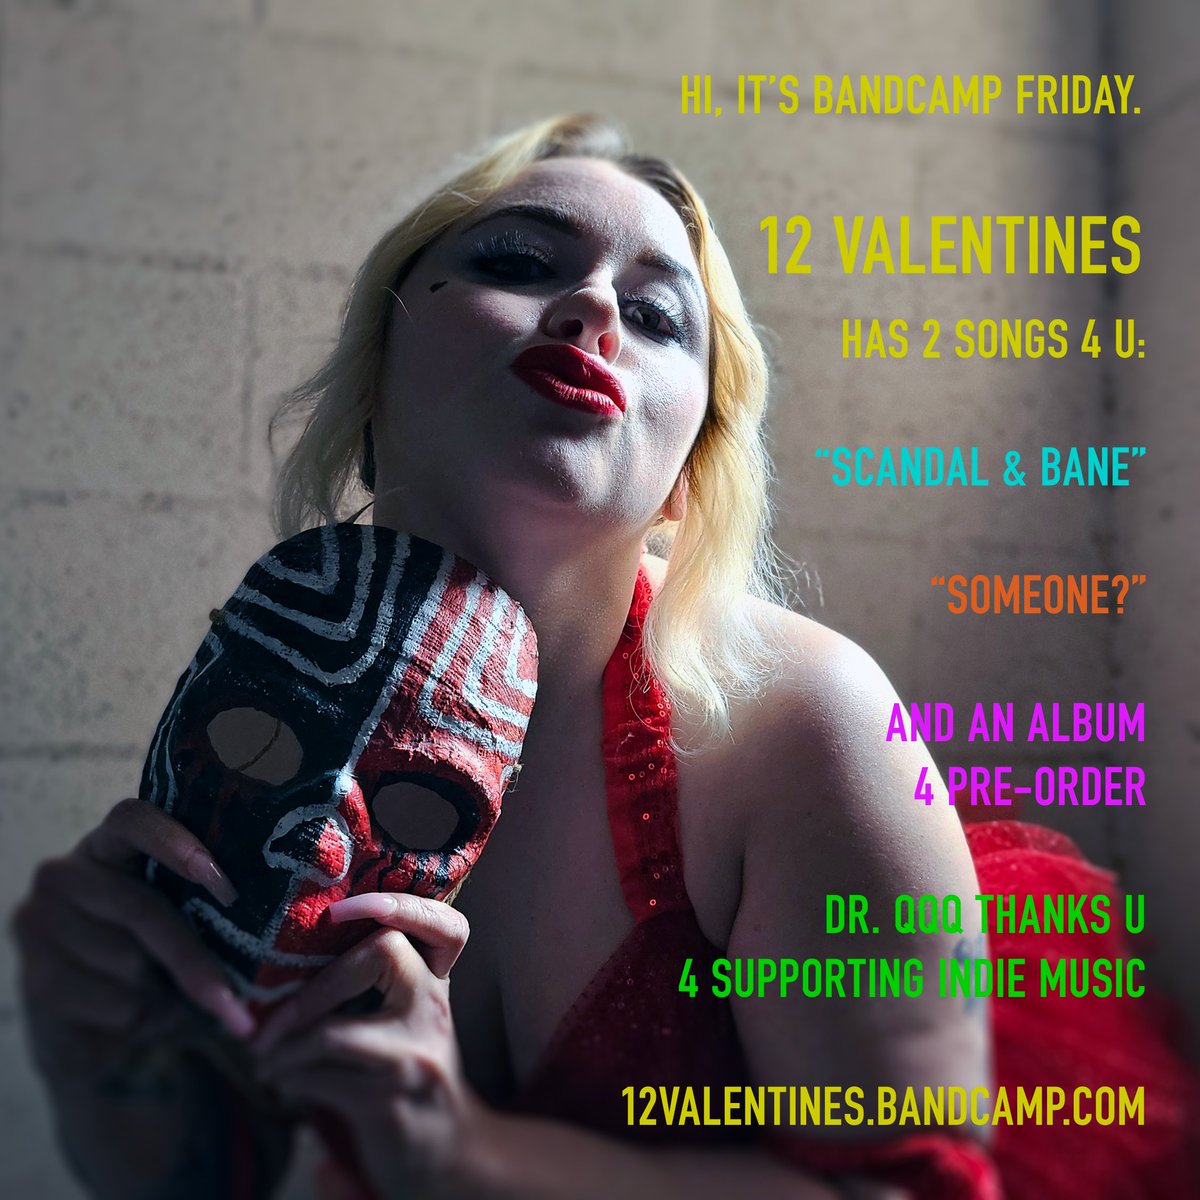 It's #BandcampFriday! Harley/Dr. QQQ would like you to enjoy a #12Valentines song from 12valentines.bandcamp.com. #Indiepop by me, @mzmo, @gabyalter, Joey Slater, and other fun folk.
#womanduet #nerdcore #geekpop #AAPIHeritageMonth #indiemusic